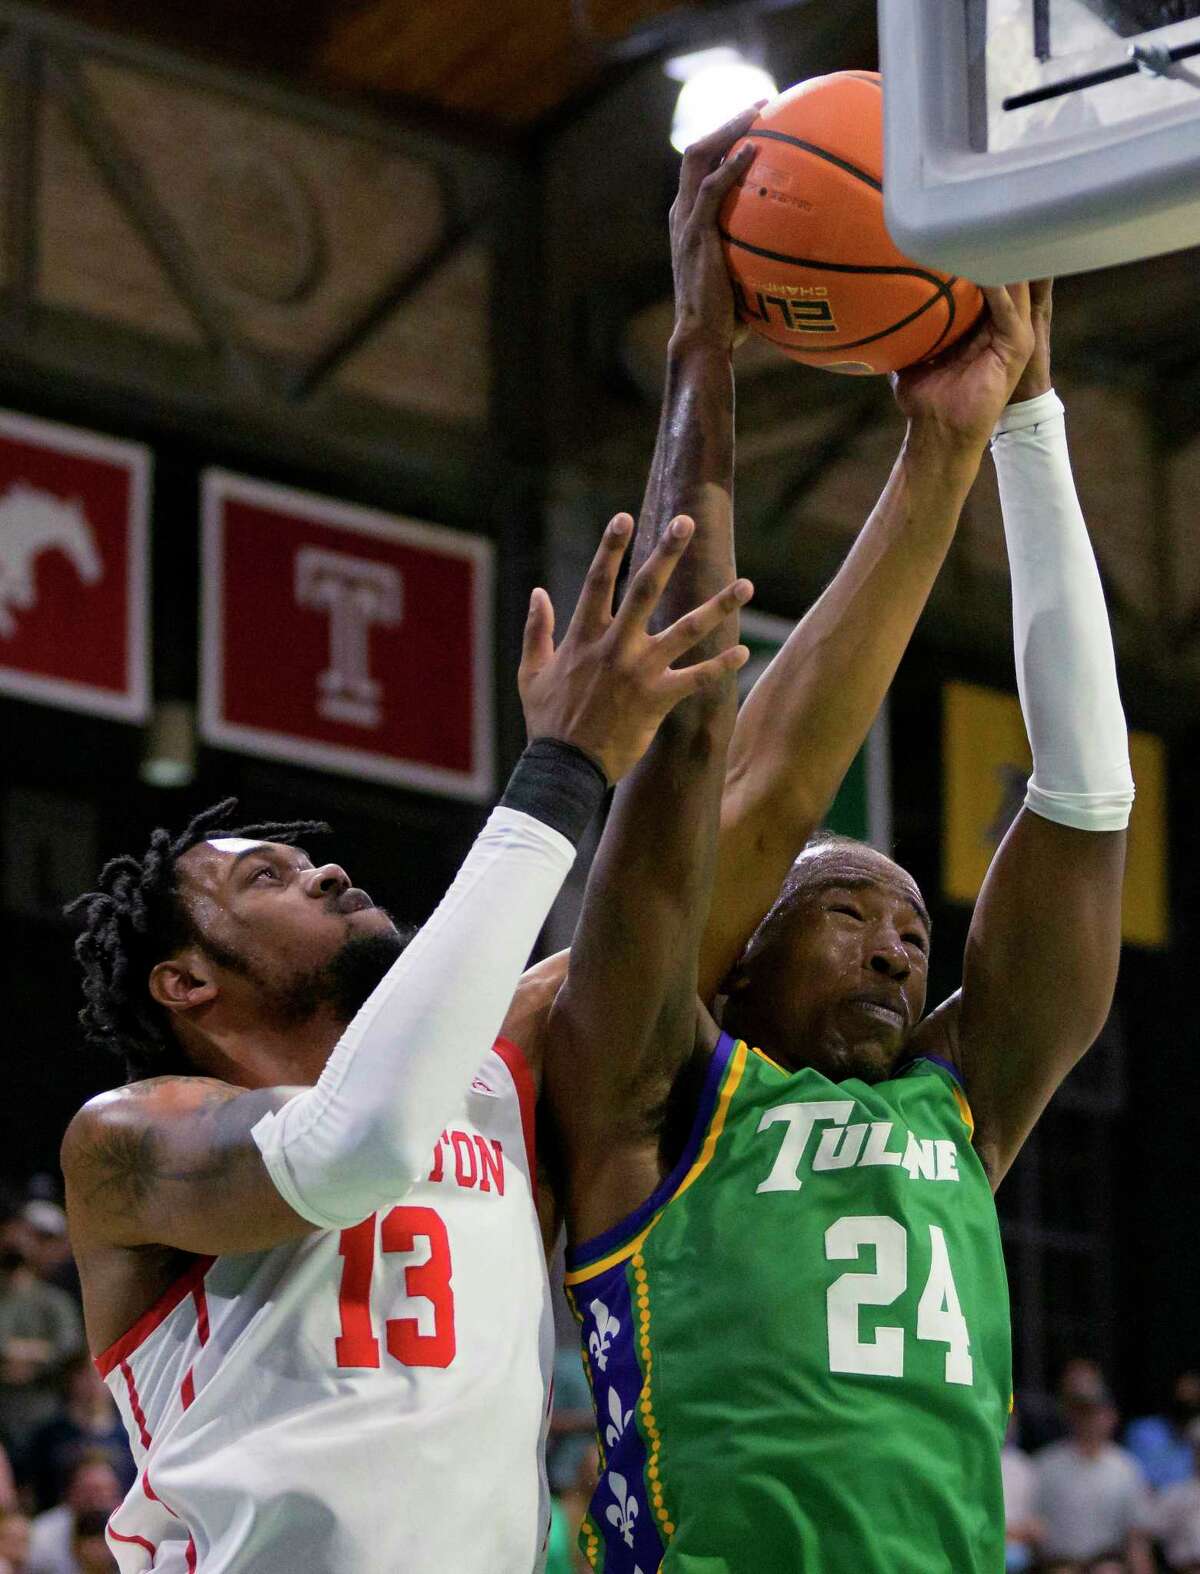 Tulane forward Kevin Cross (24) grabs a rebound next to Houston forward J'Wan Roberts (13) during the first half of an NCAA college basketball game in New Orleans, Wednesday, Feb. 23, 2022. (AP Photo/Matthew Hinton)